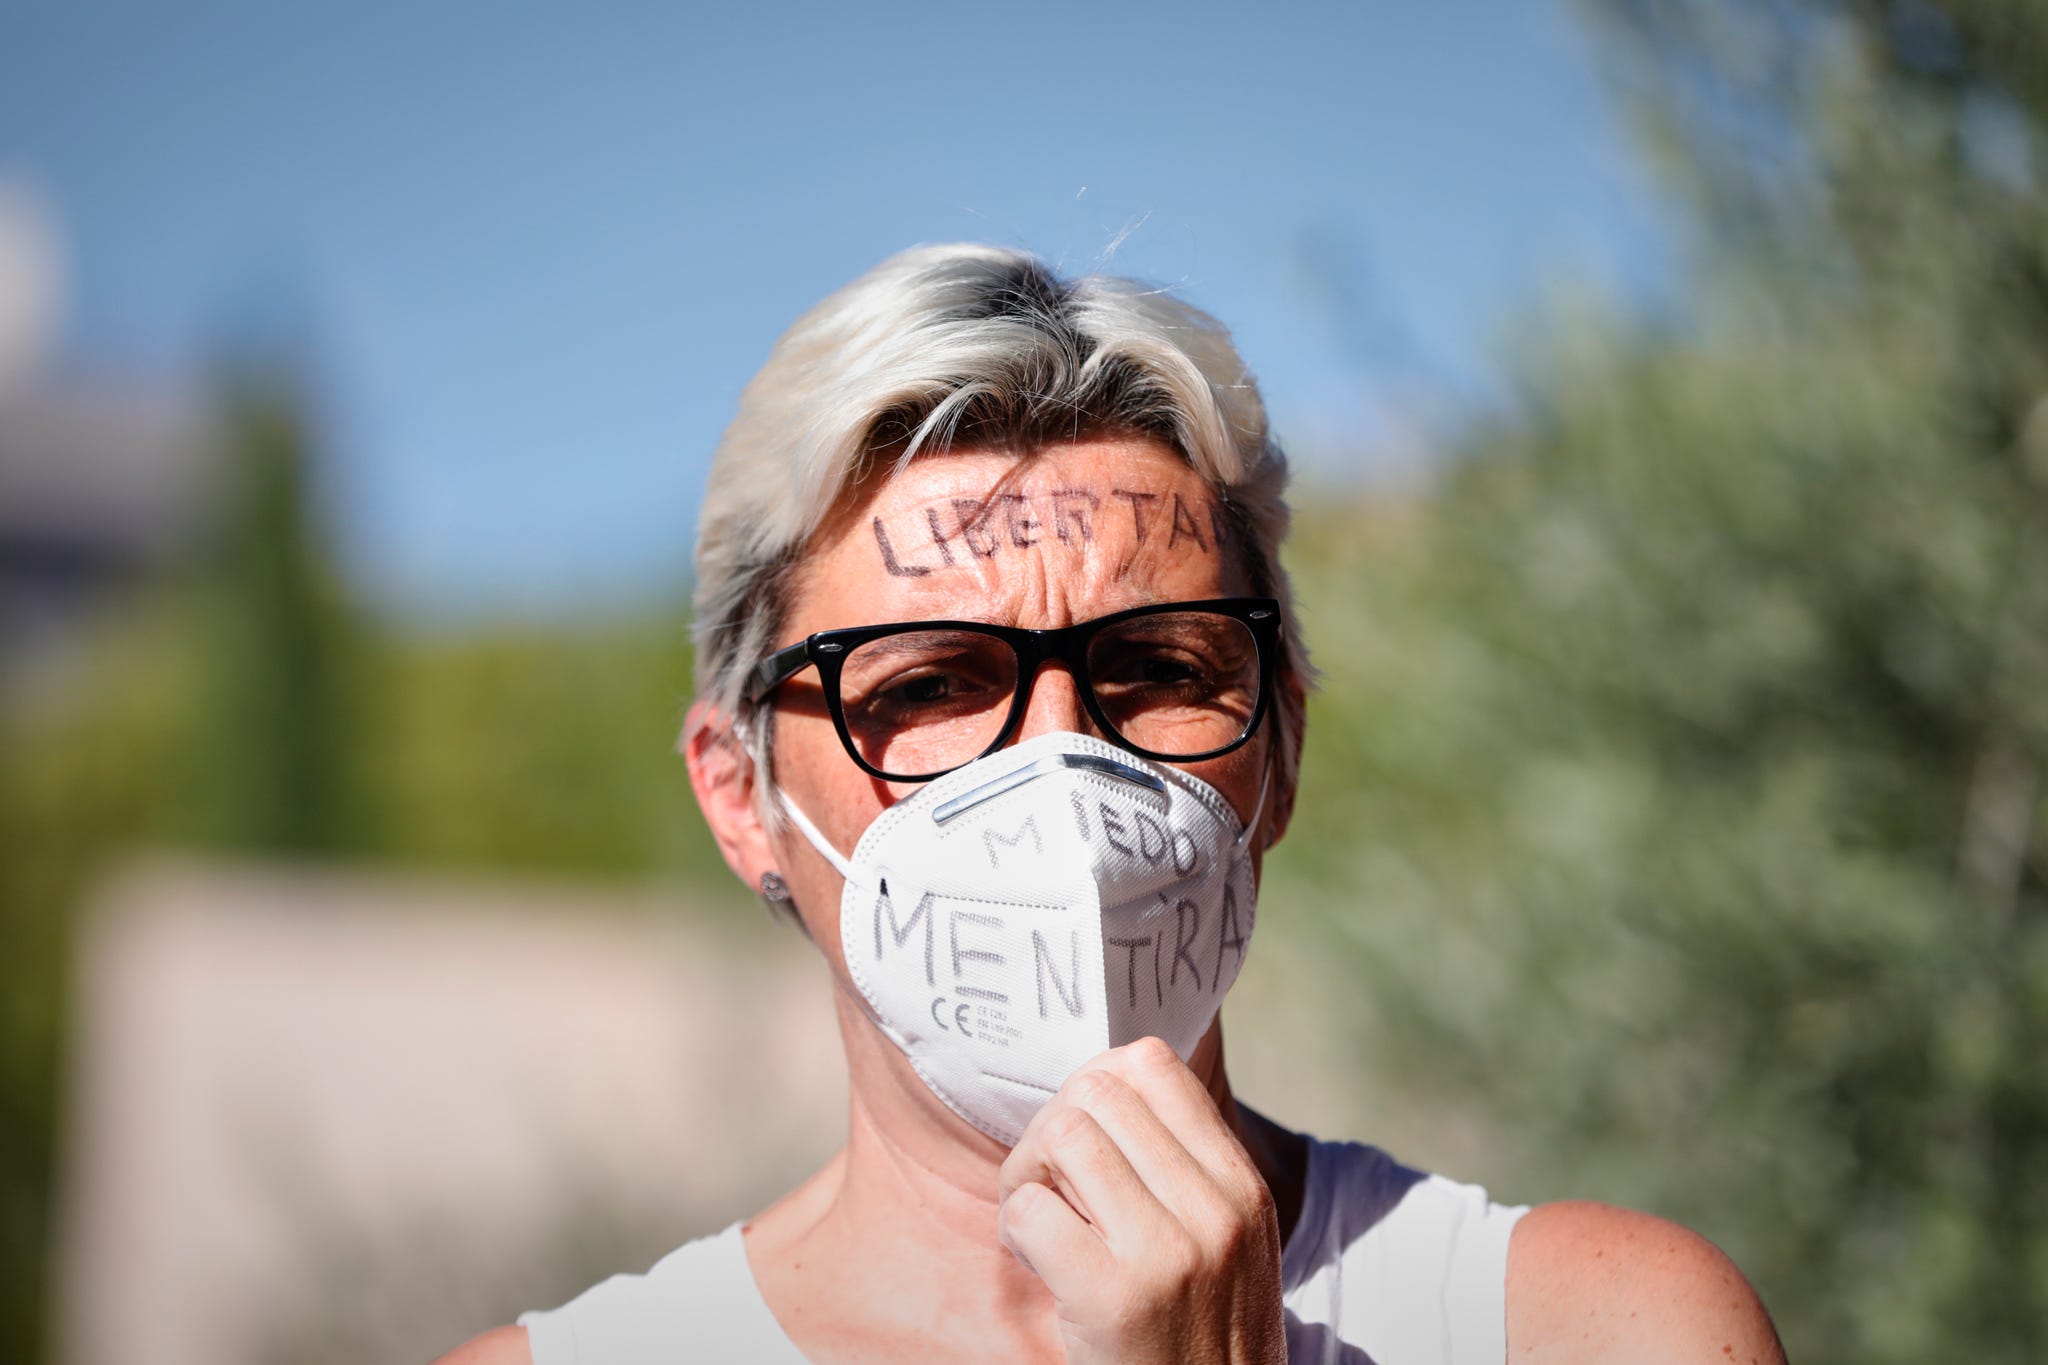 madrid, spain   august 16  attendees participate in the manifestation against the mandatory use of masks in madrids plaza de colón, on august 16, 2020 in madrid, spain photo by jesus hellin europa press via getty images